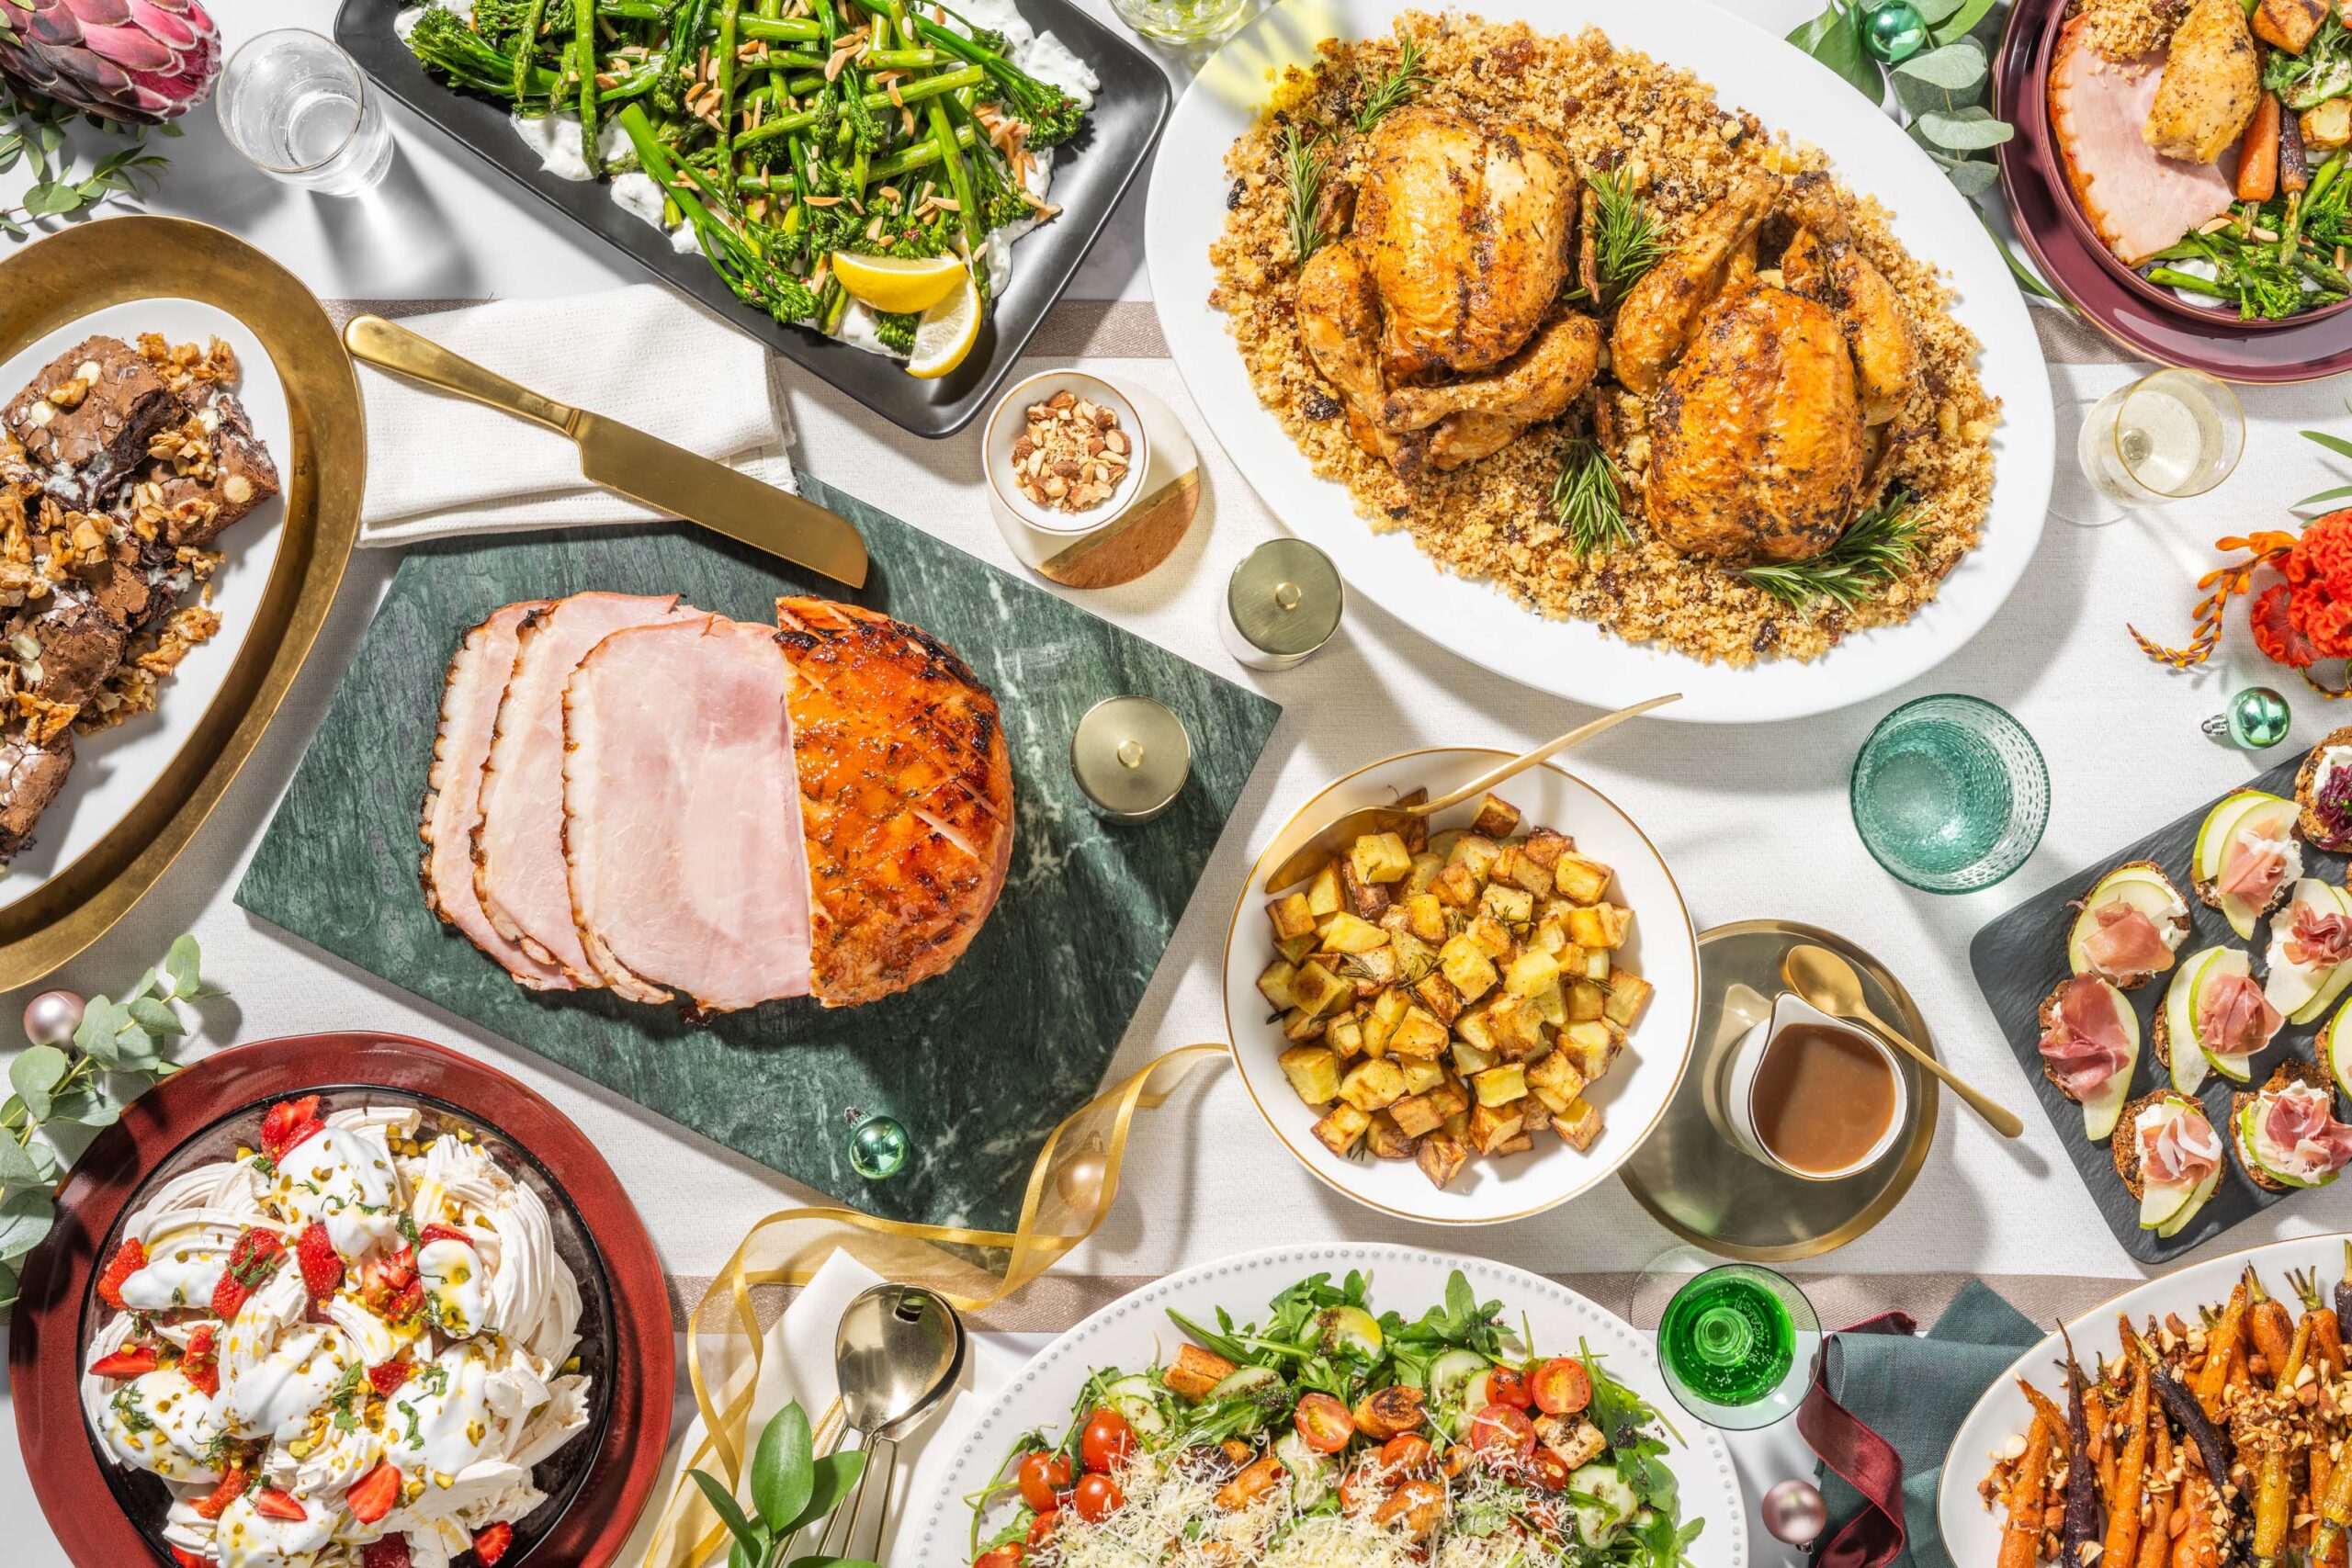 A delicious Christmas feast made with the HelloFresh Christmas Box. Featuring chickens, ham, veggies and desserts. You'll get all your ingredients pre-portioned to help with reducing food waste.